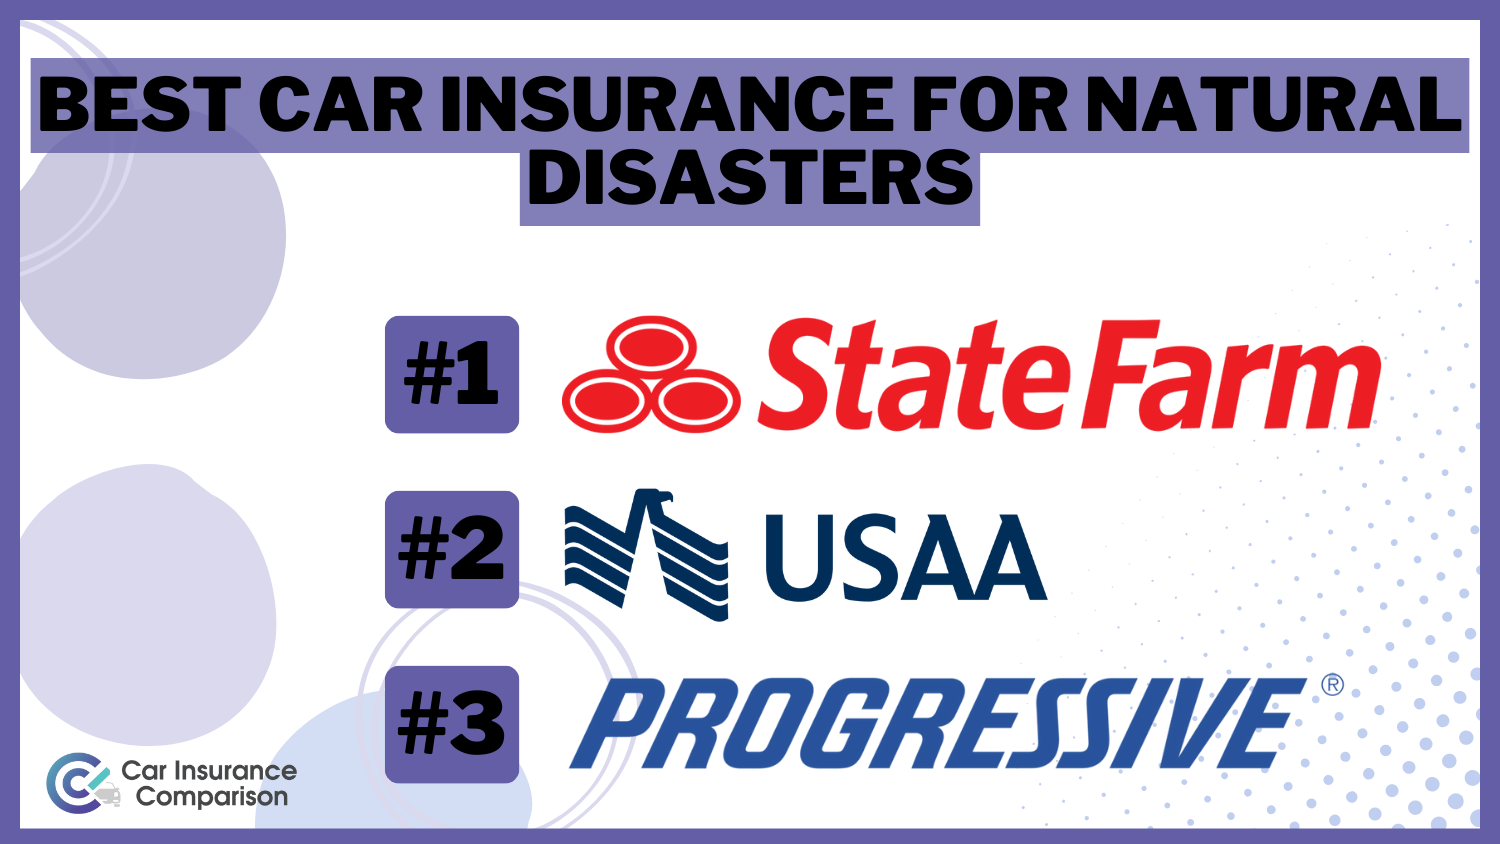 Best Car Insurance for Natural Disasters: State farm, USAA, and Progressive.